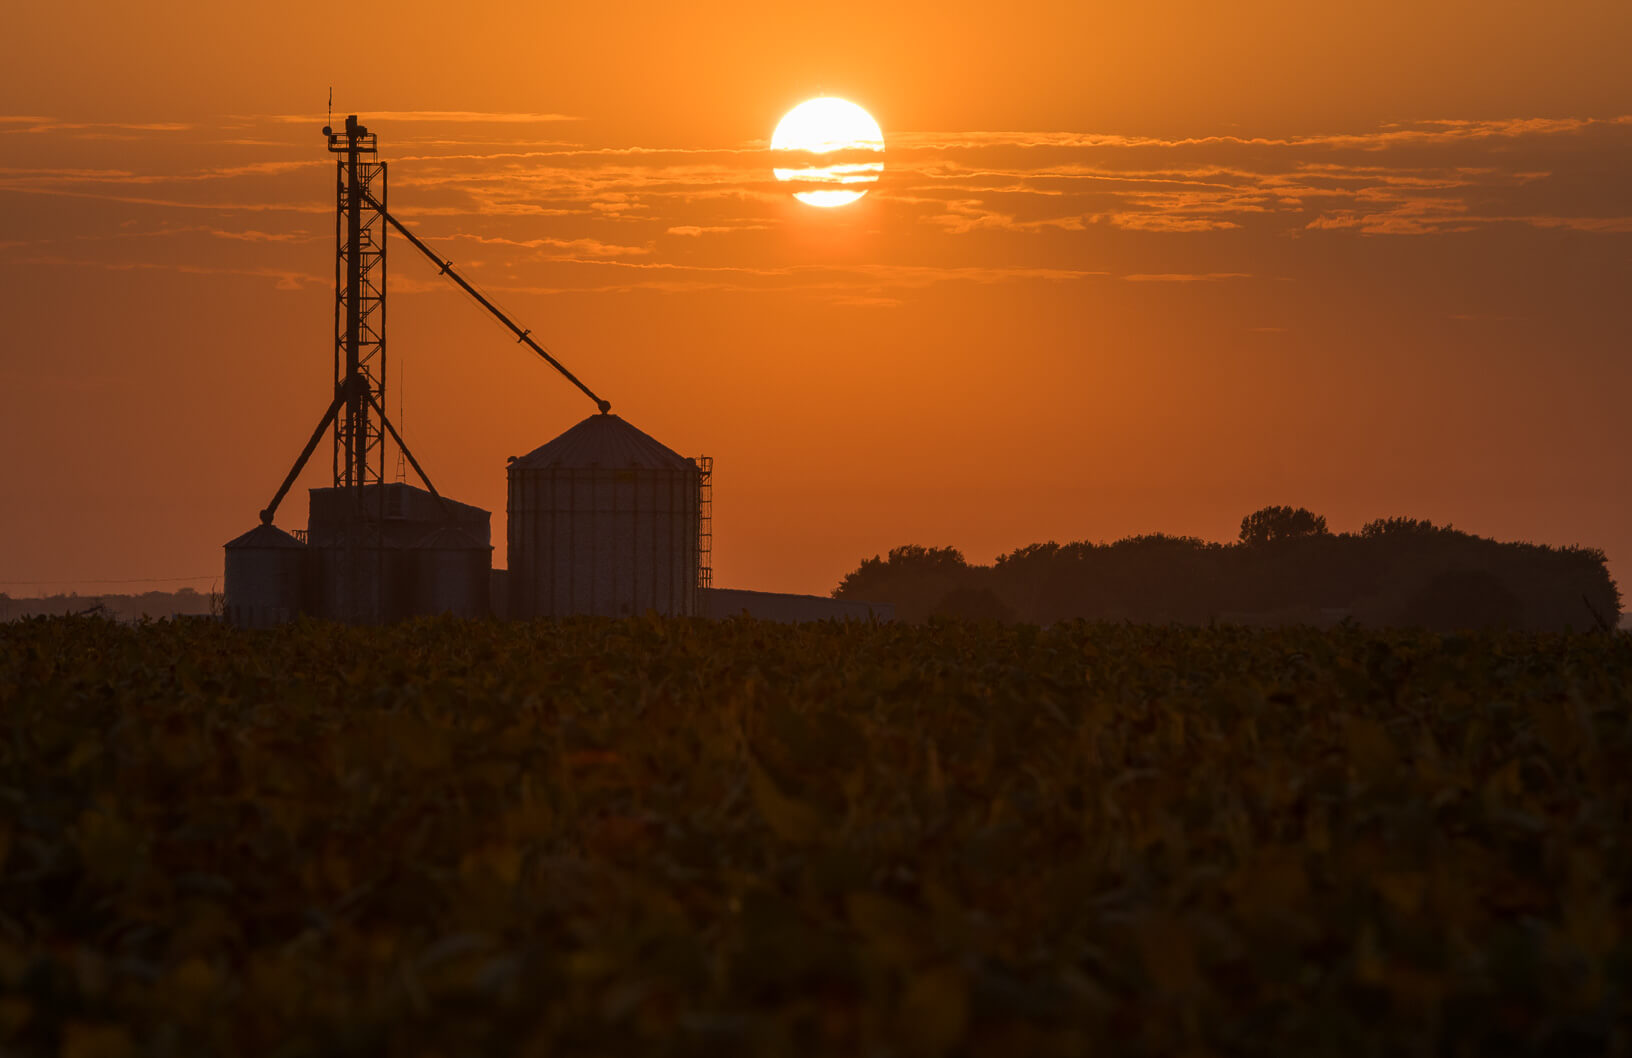 A collection of grain bins silhouetted at sunset